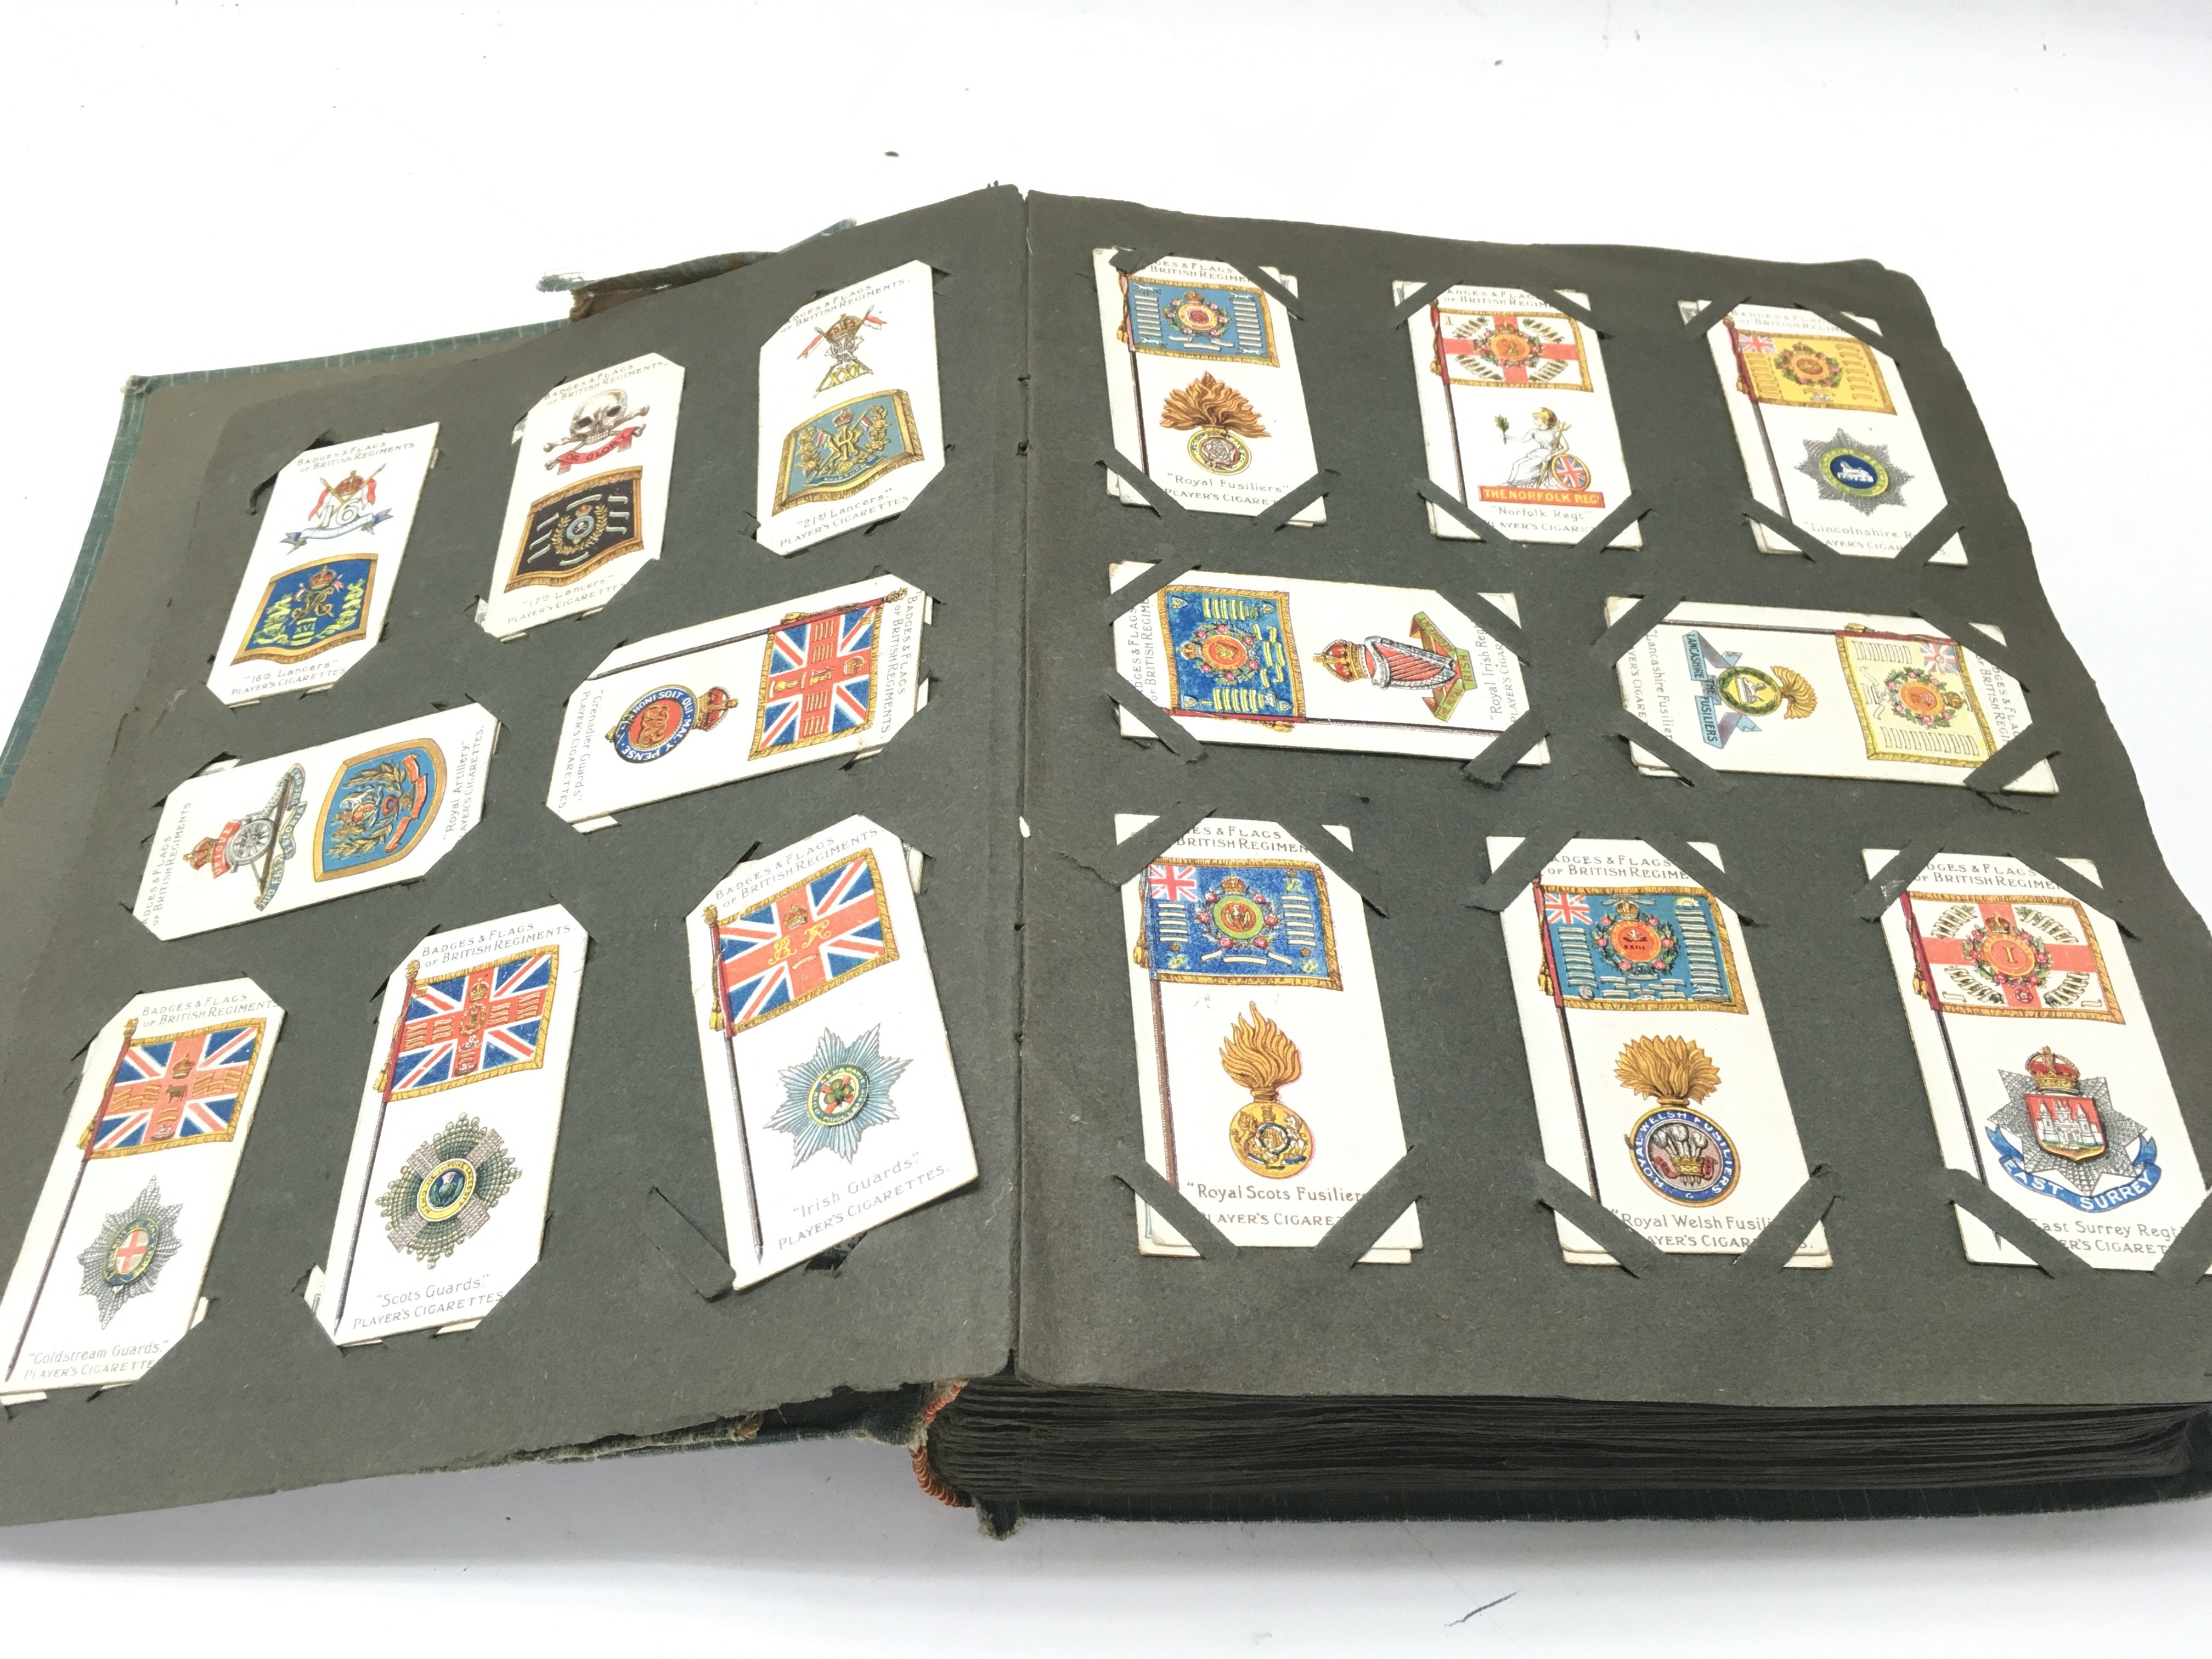 An album containing a large number of vintage cigarette cards. - Image 2 of 12